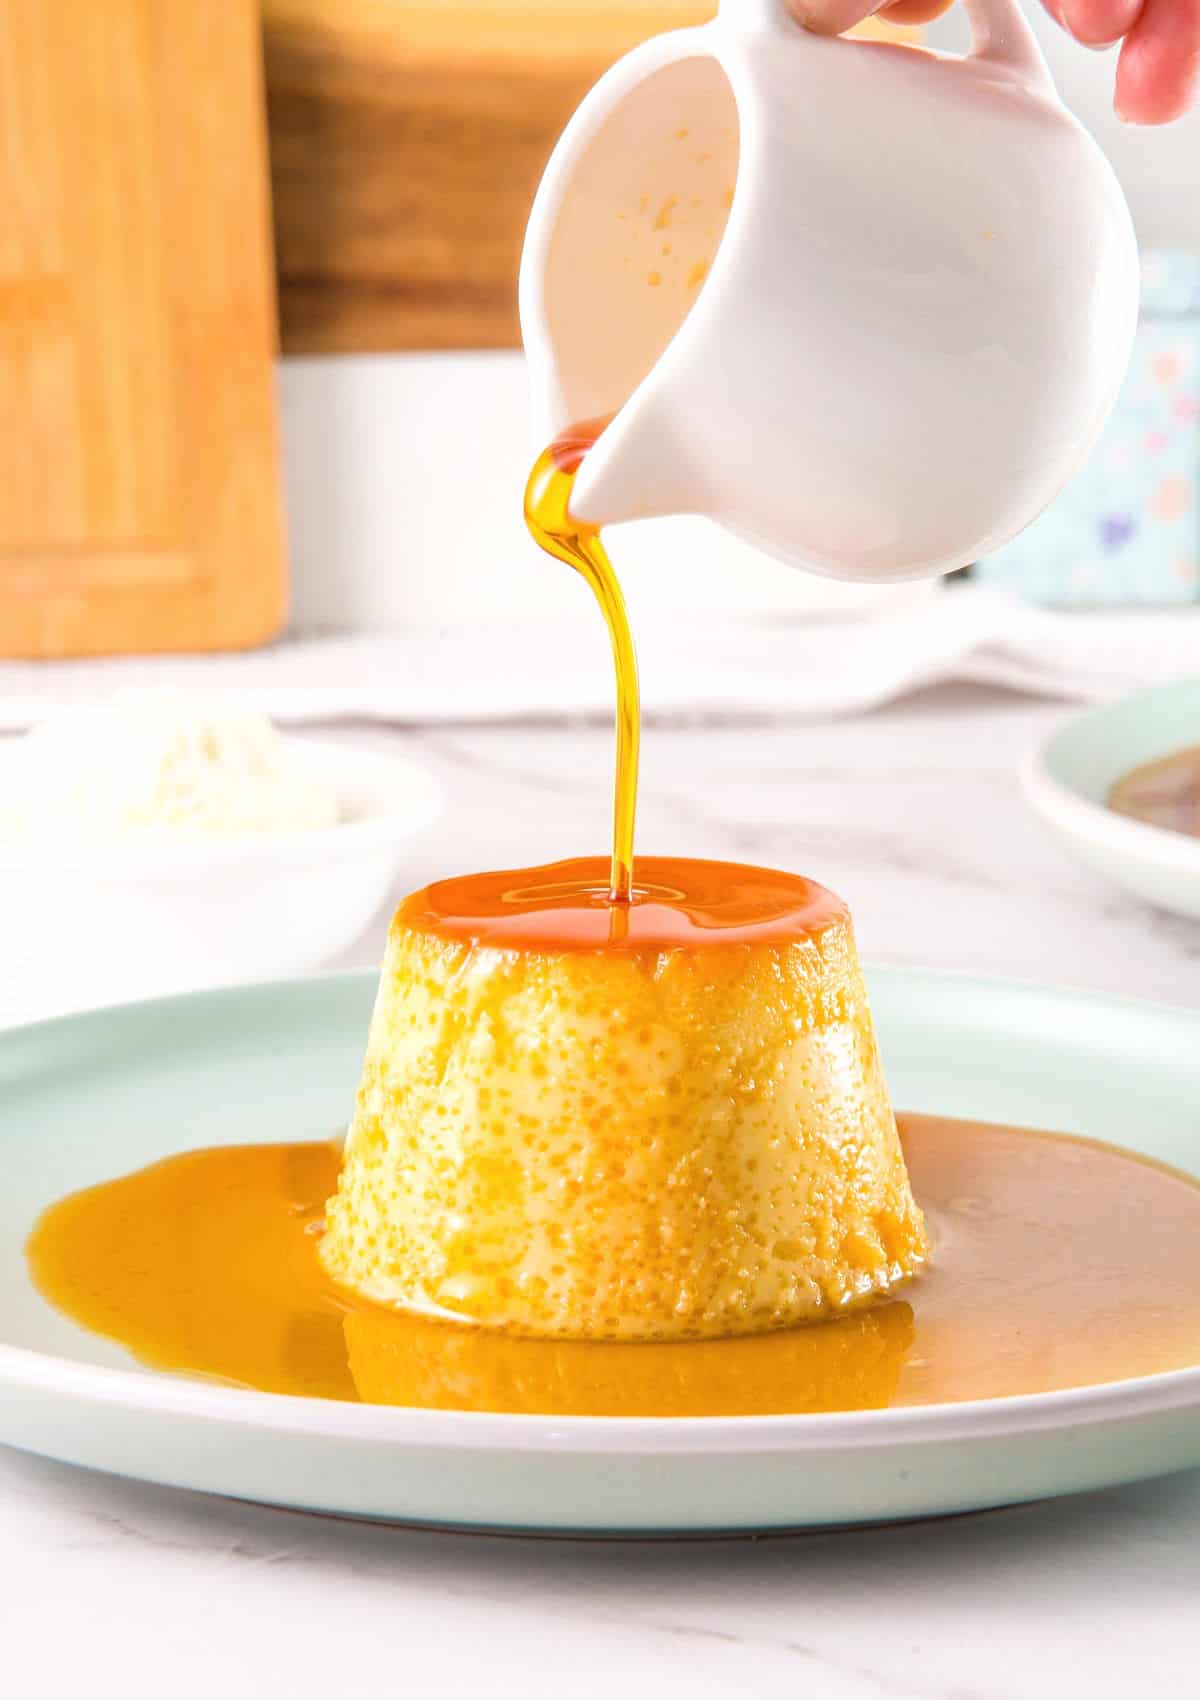 Pouring caramel on an individual flan on a plate. Wood prop on white background.